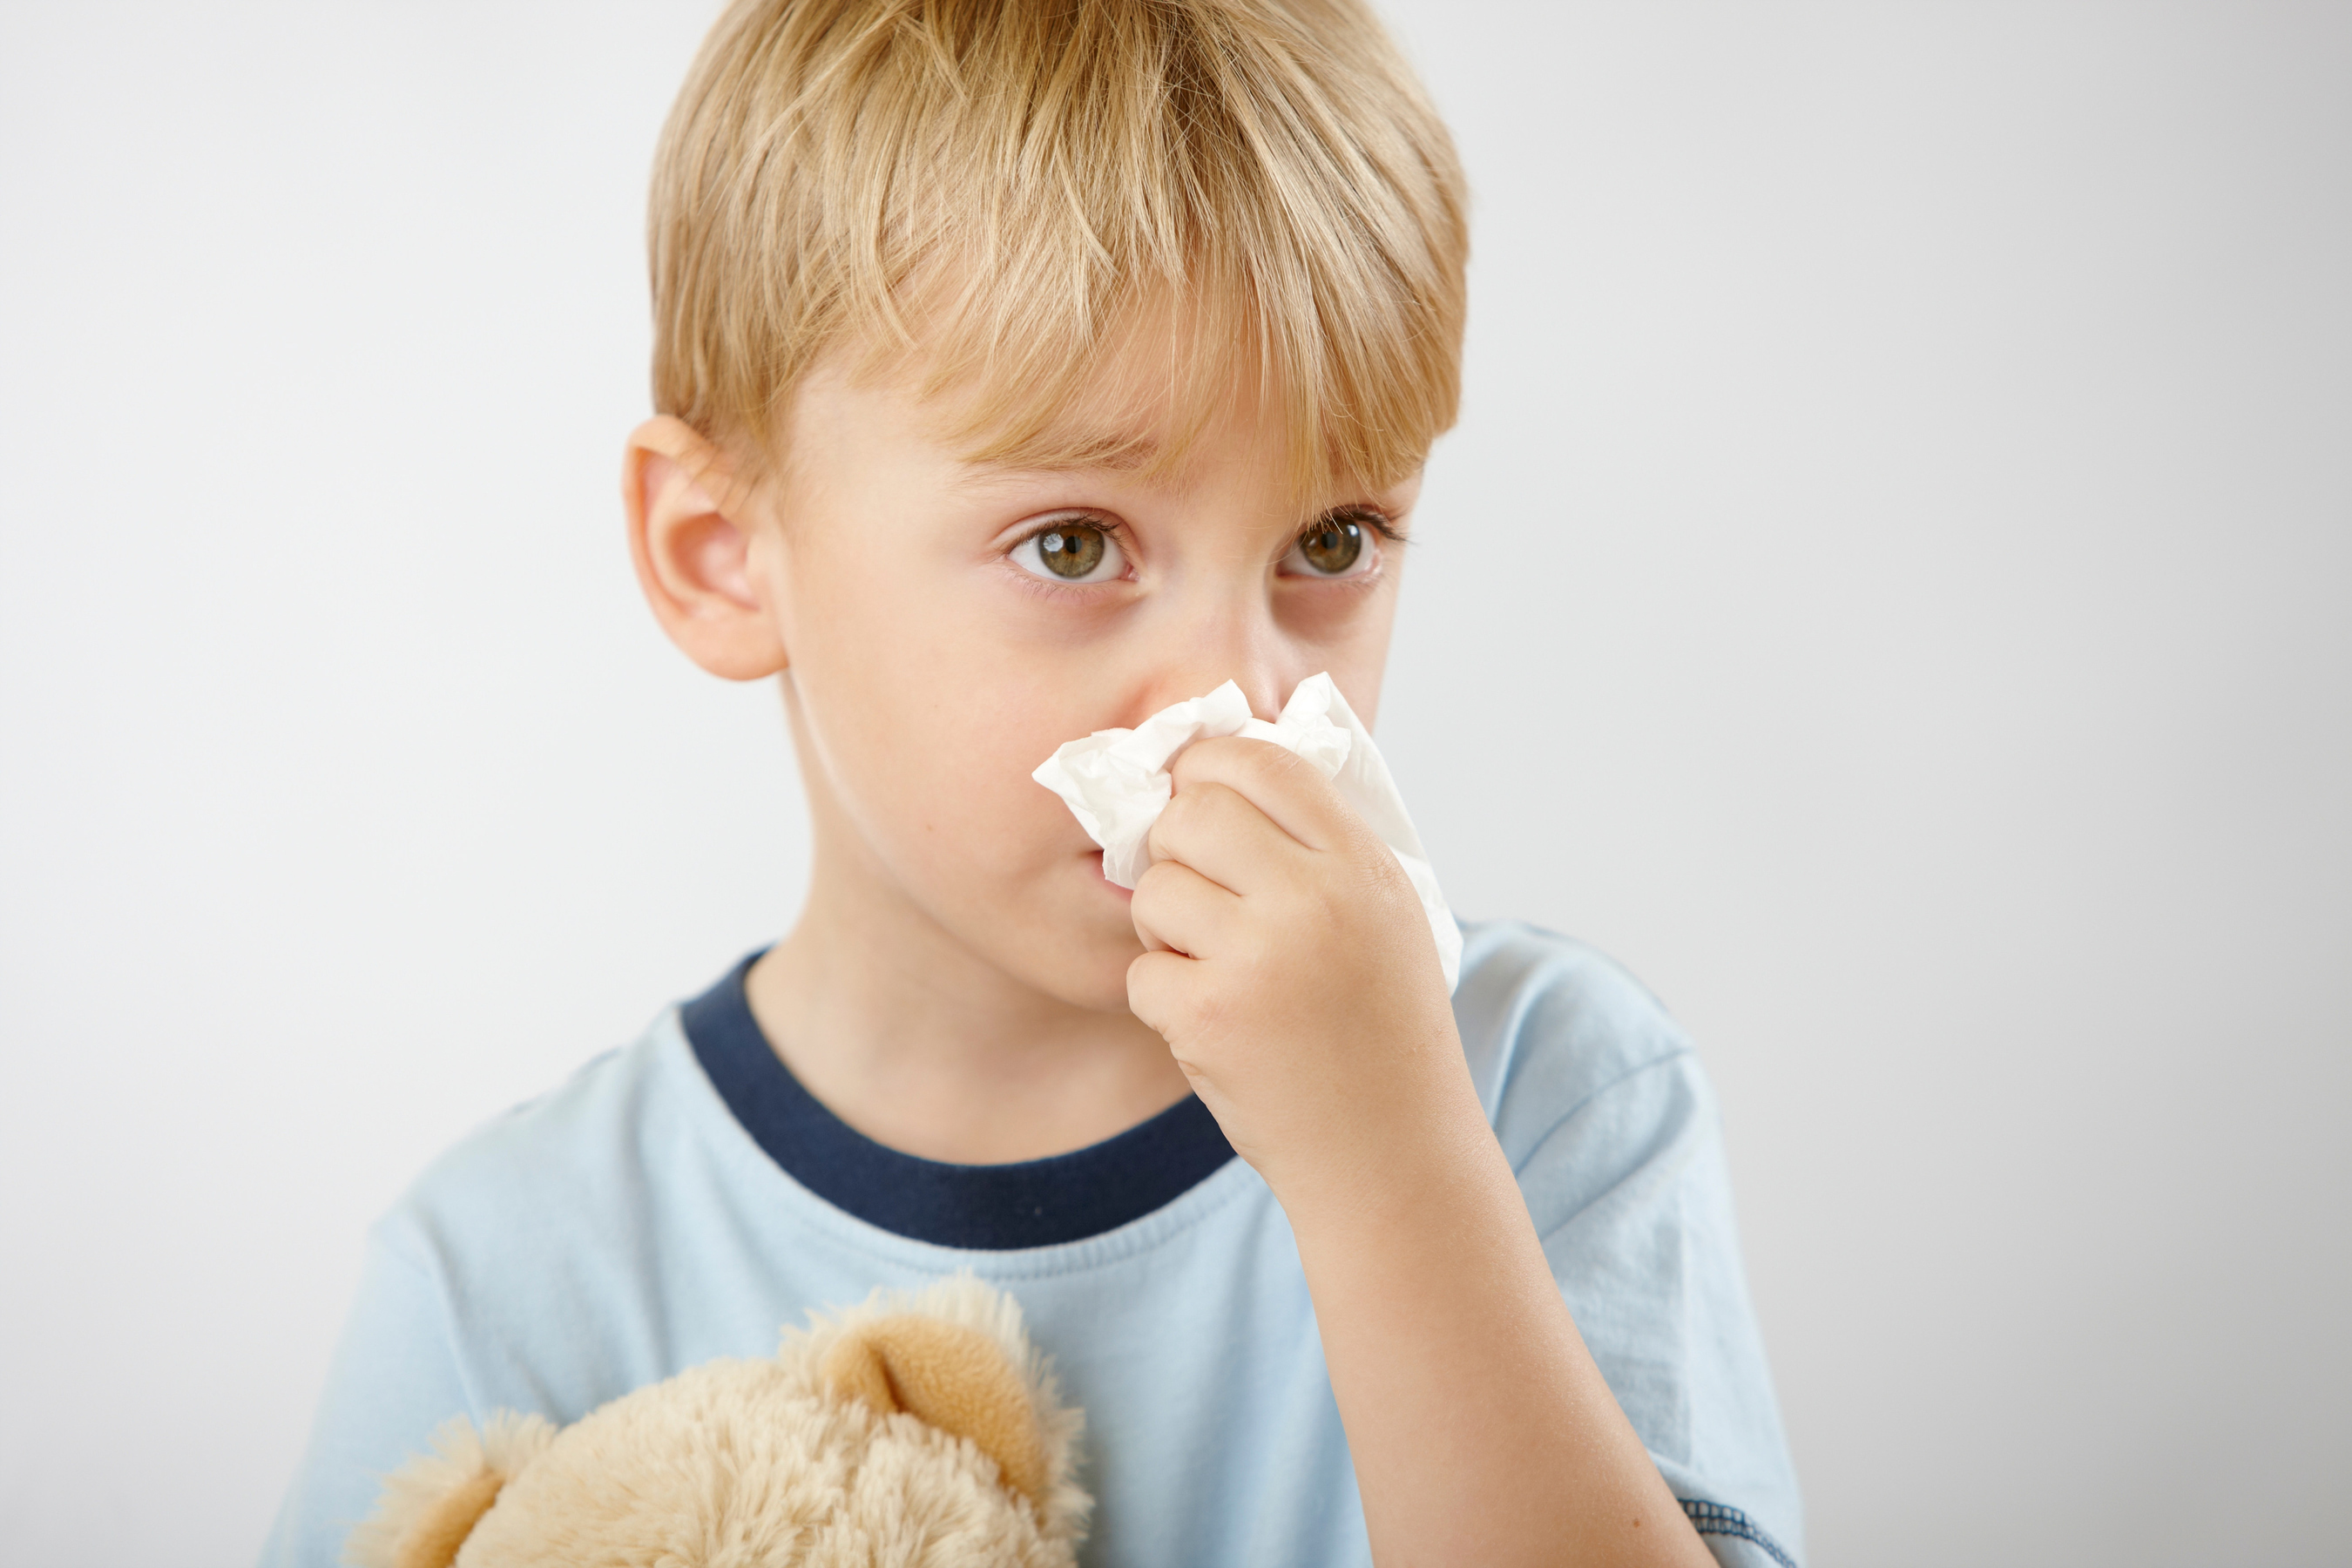 More than 25 million Americans have been diagnosed with asthma and 50 million suffer from allergies. Dust alone is comprised of dead insects, dust mites, mold spores, pollen, dander, skin flakes and other particulates that can be harmful to health. Controlling indoor air quality can provide relief for asthma and allergy sufferers and protect your family from getting sick.  This image must be used in conjunction with the news release with which it was originally distributed (PRNewsFoto/Aprilaire)